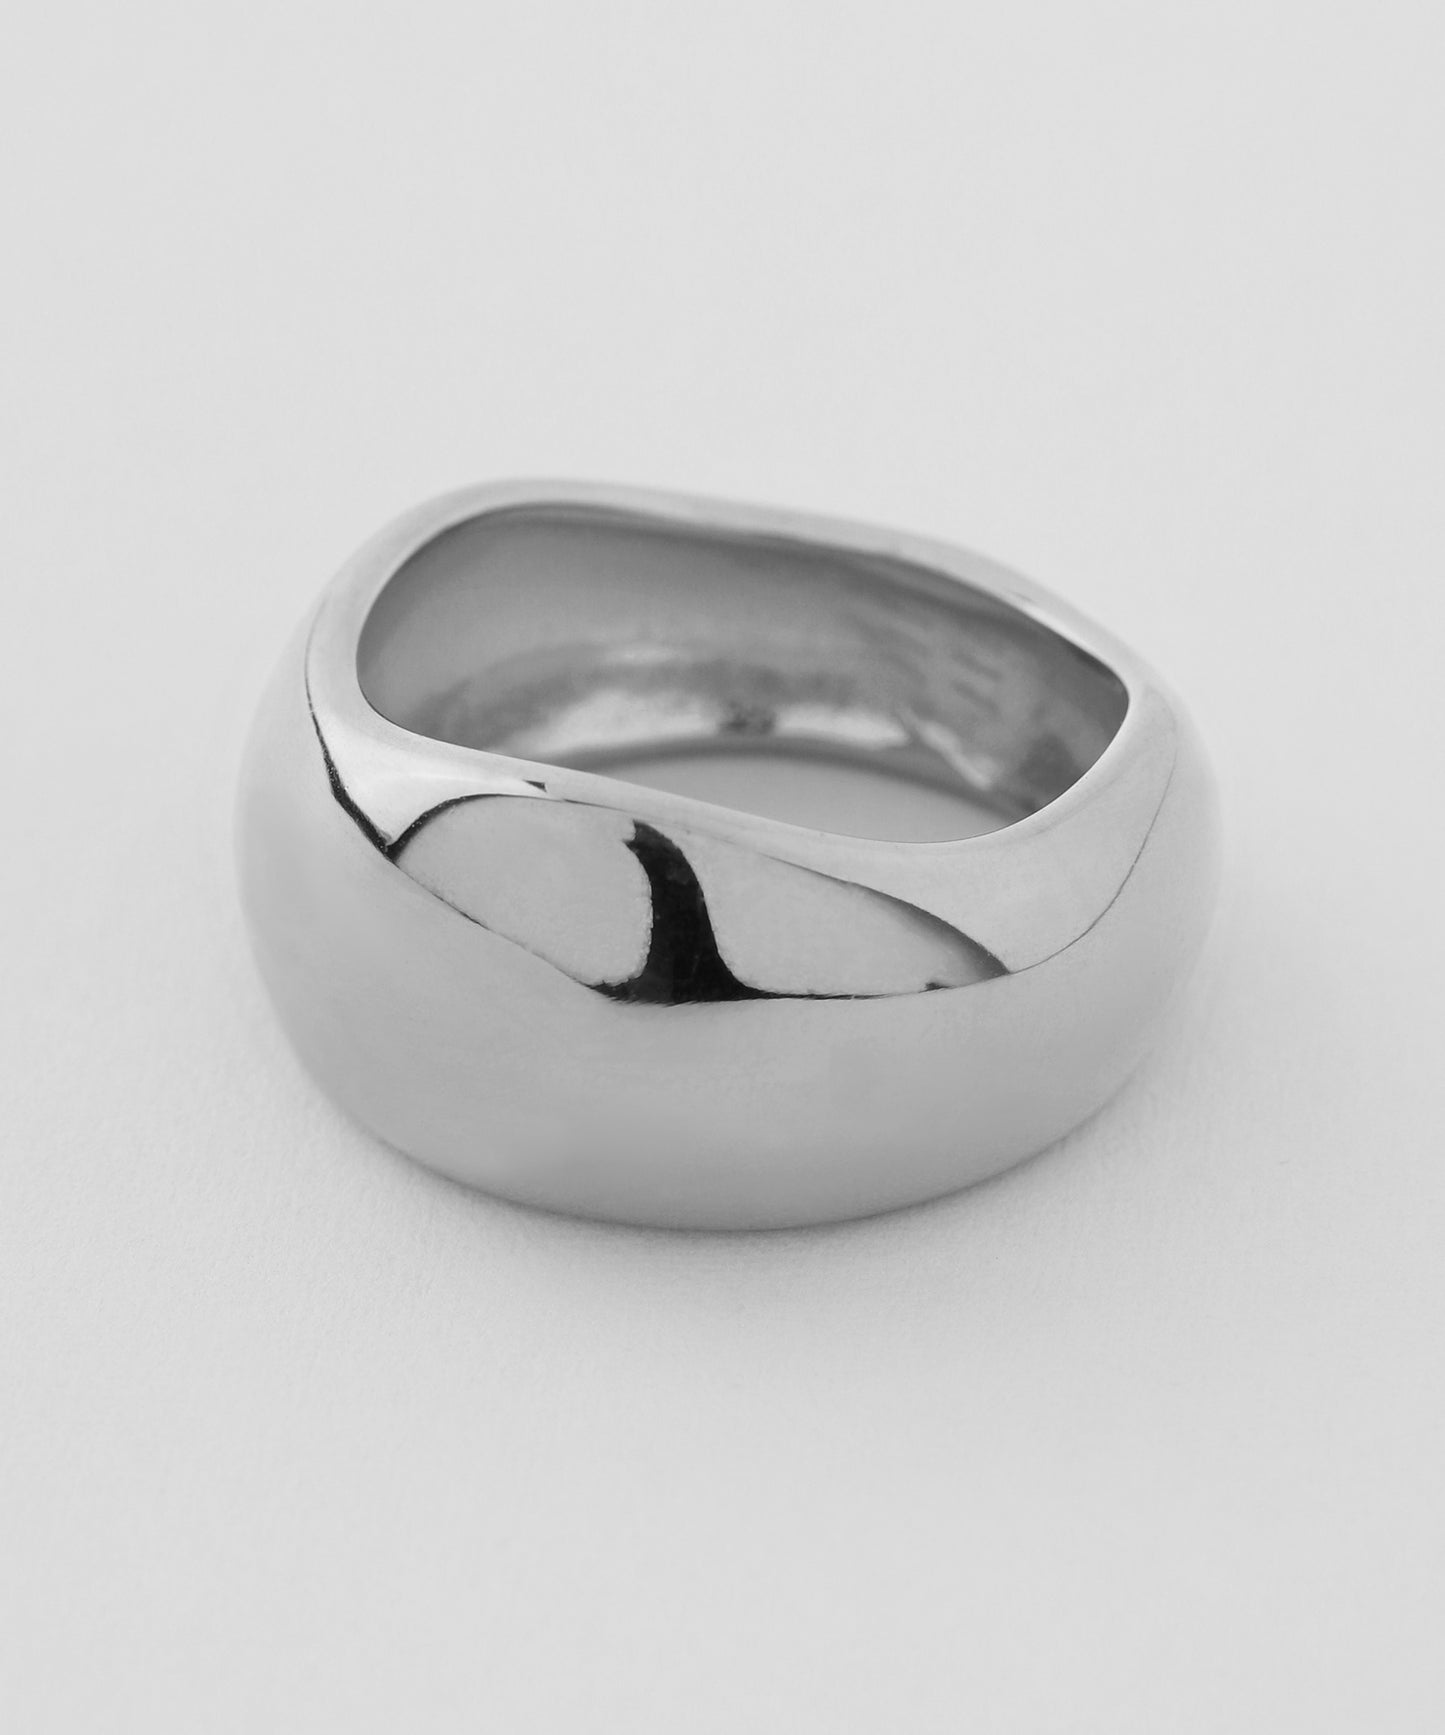 【Stainless Steel IP】Nuance Volume Ring